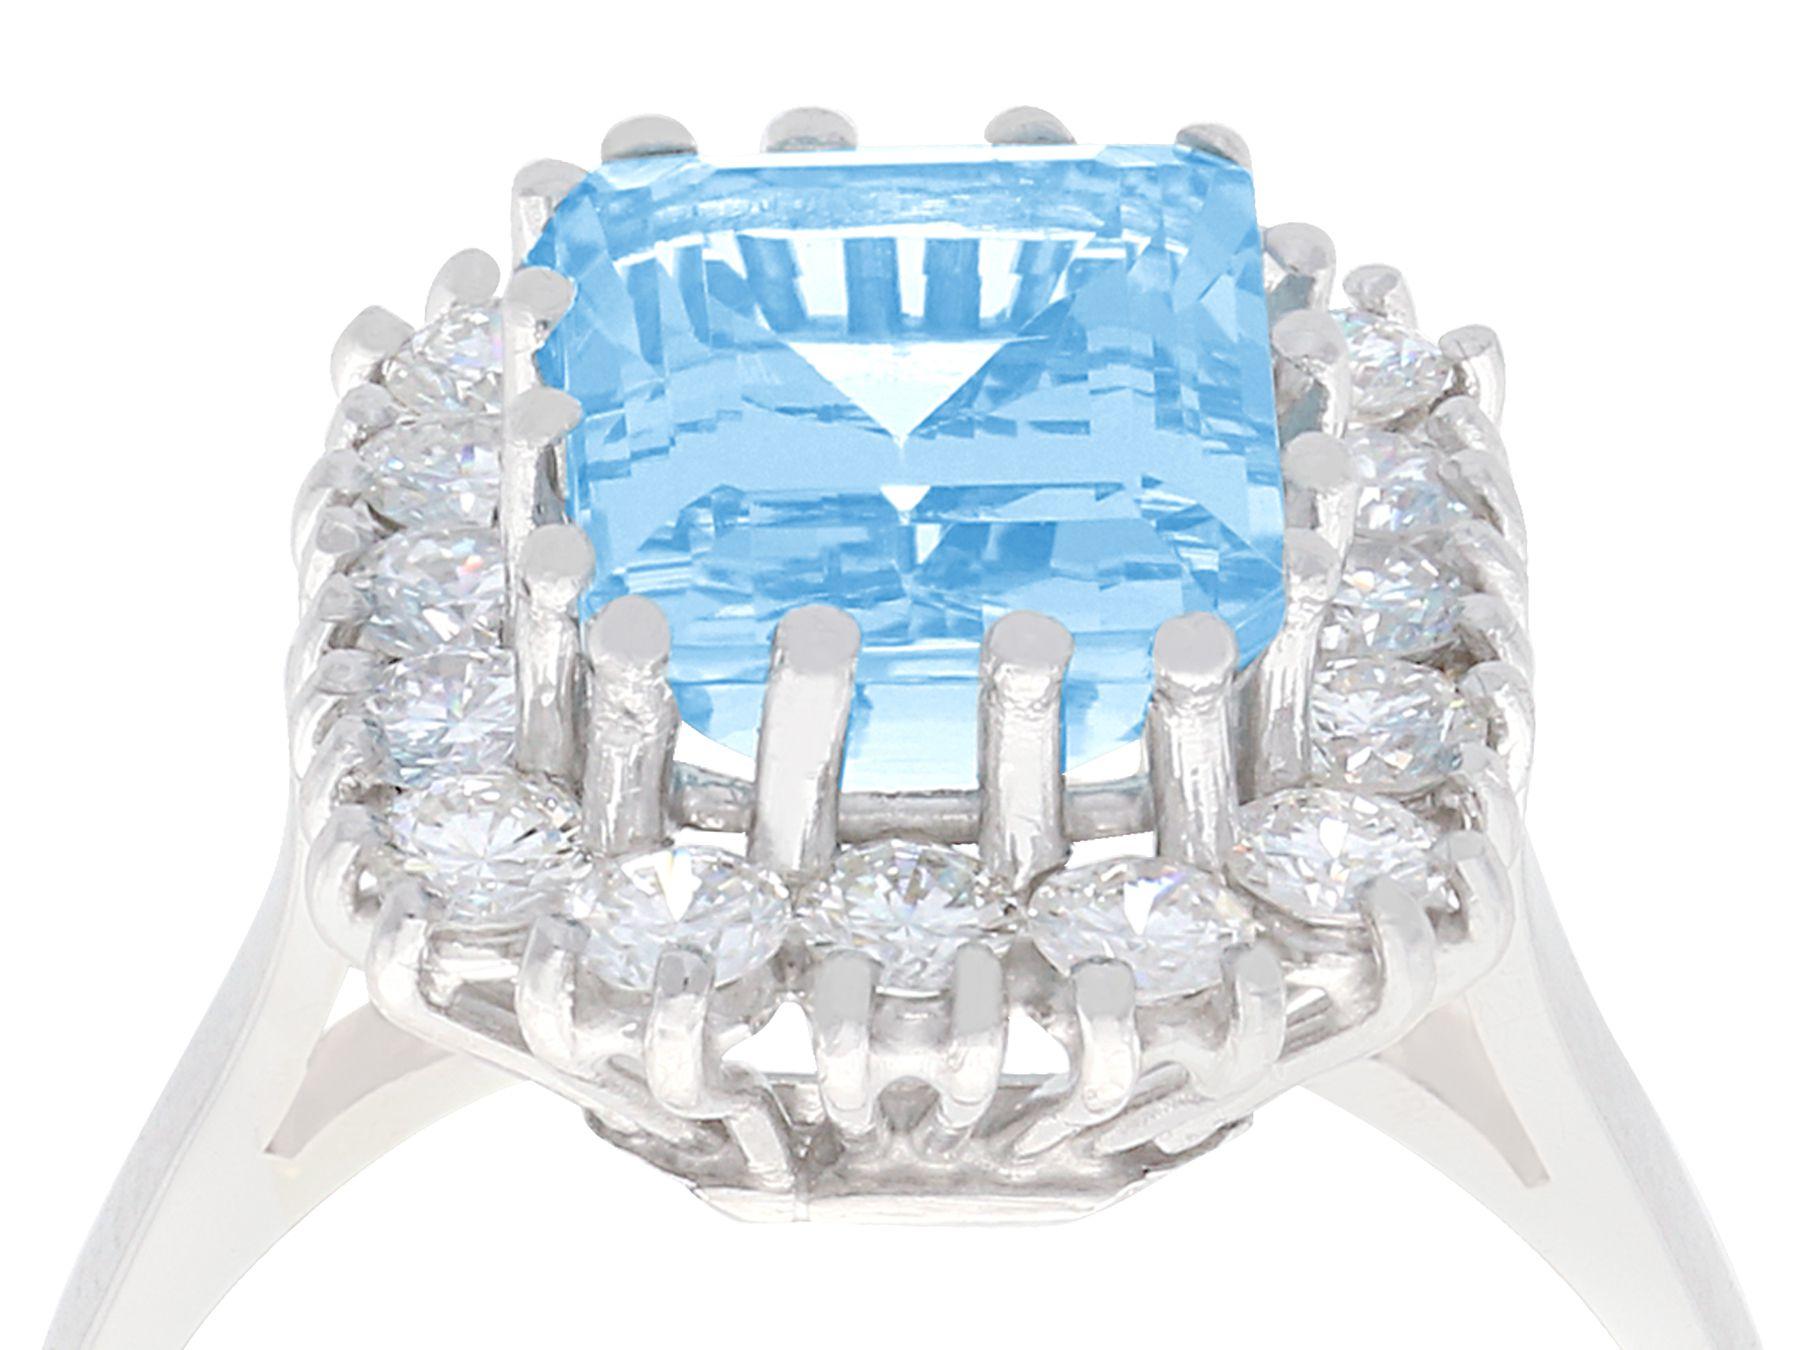 A fine and impressive vintage French 2.45 carat aquamarine and 0.75 carat diamond, 18 karat white gold cocktail ring; part of our diverse aquamarine jewelry and estate jewelry collections.

This fine and impressive vintage emerald cut aquamarine